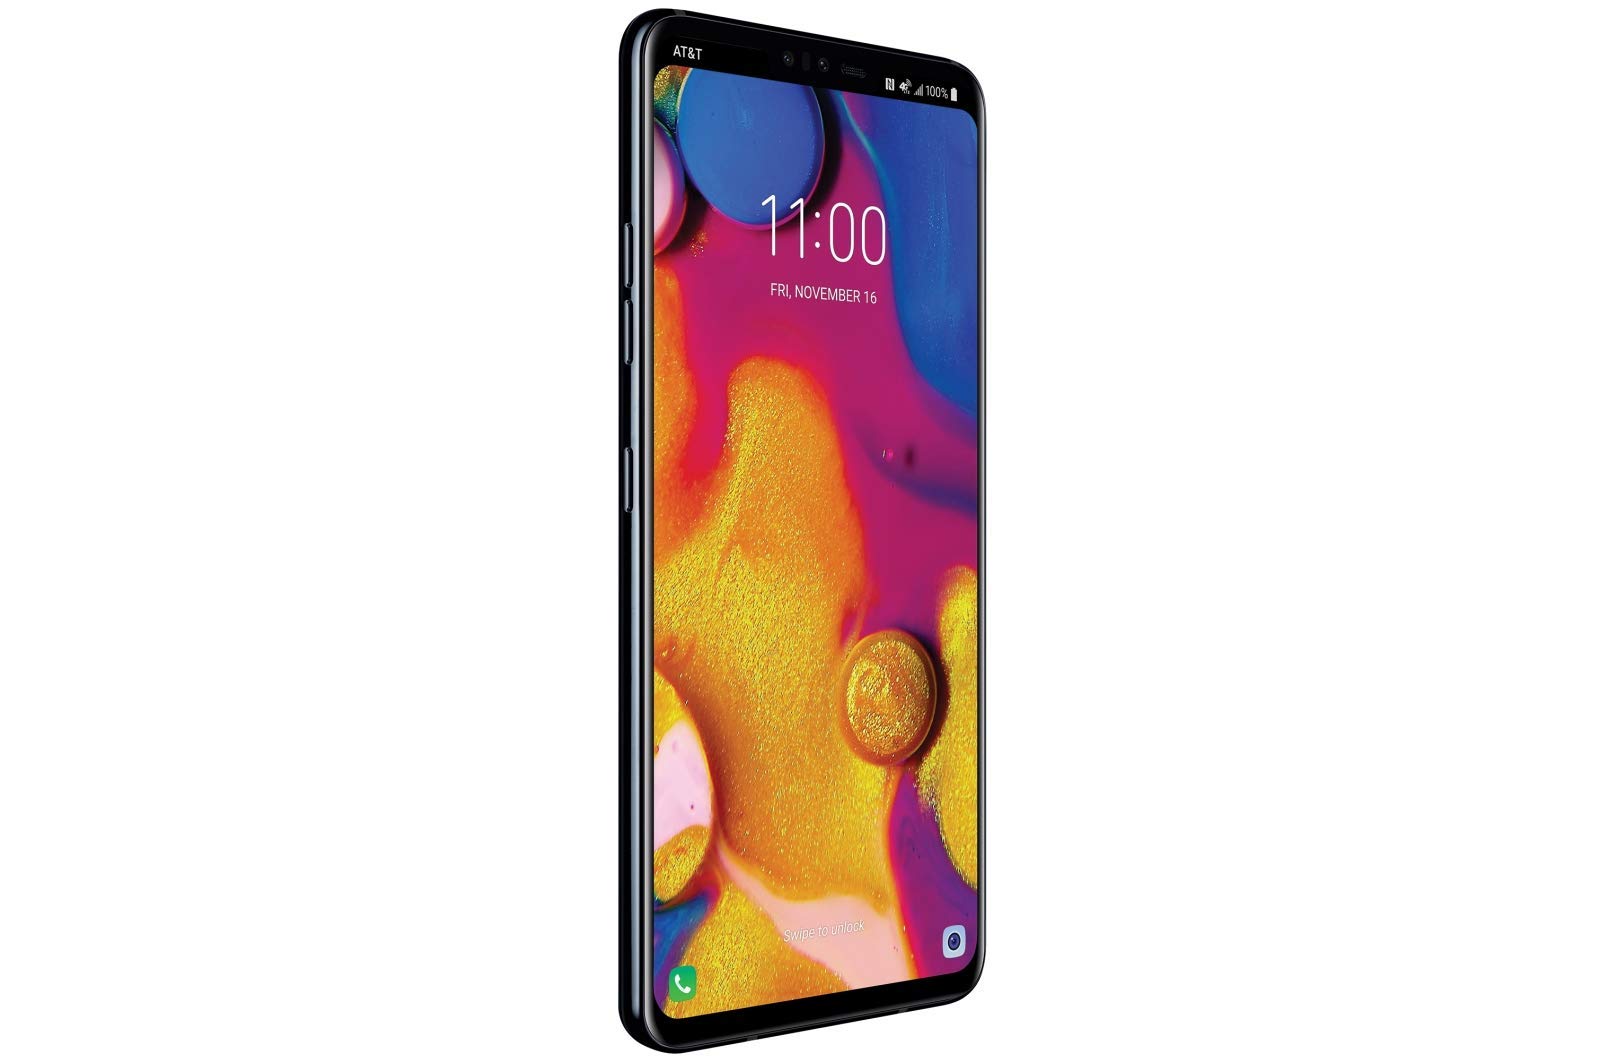 LG V40 ThinQ 64GB GSM Unlocked (AT&T/T-Mobile) 5-Camera Smartphone w/ 6.4